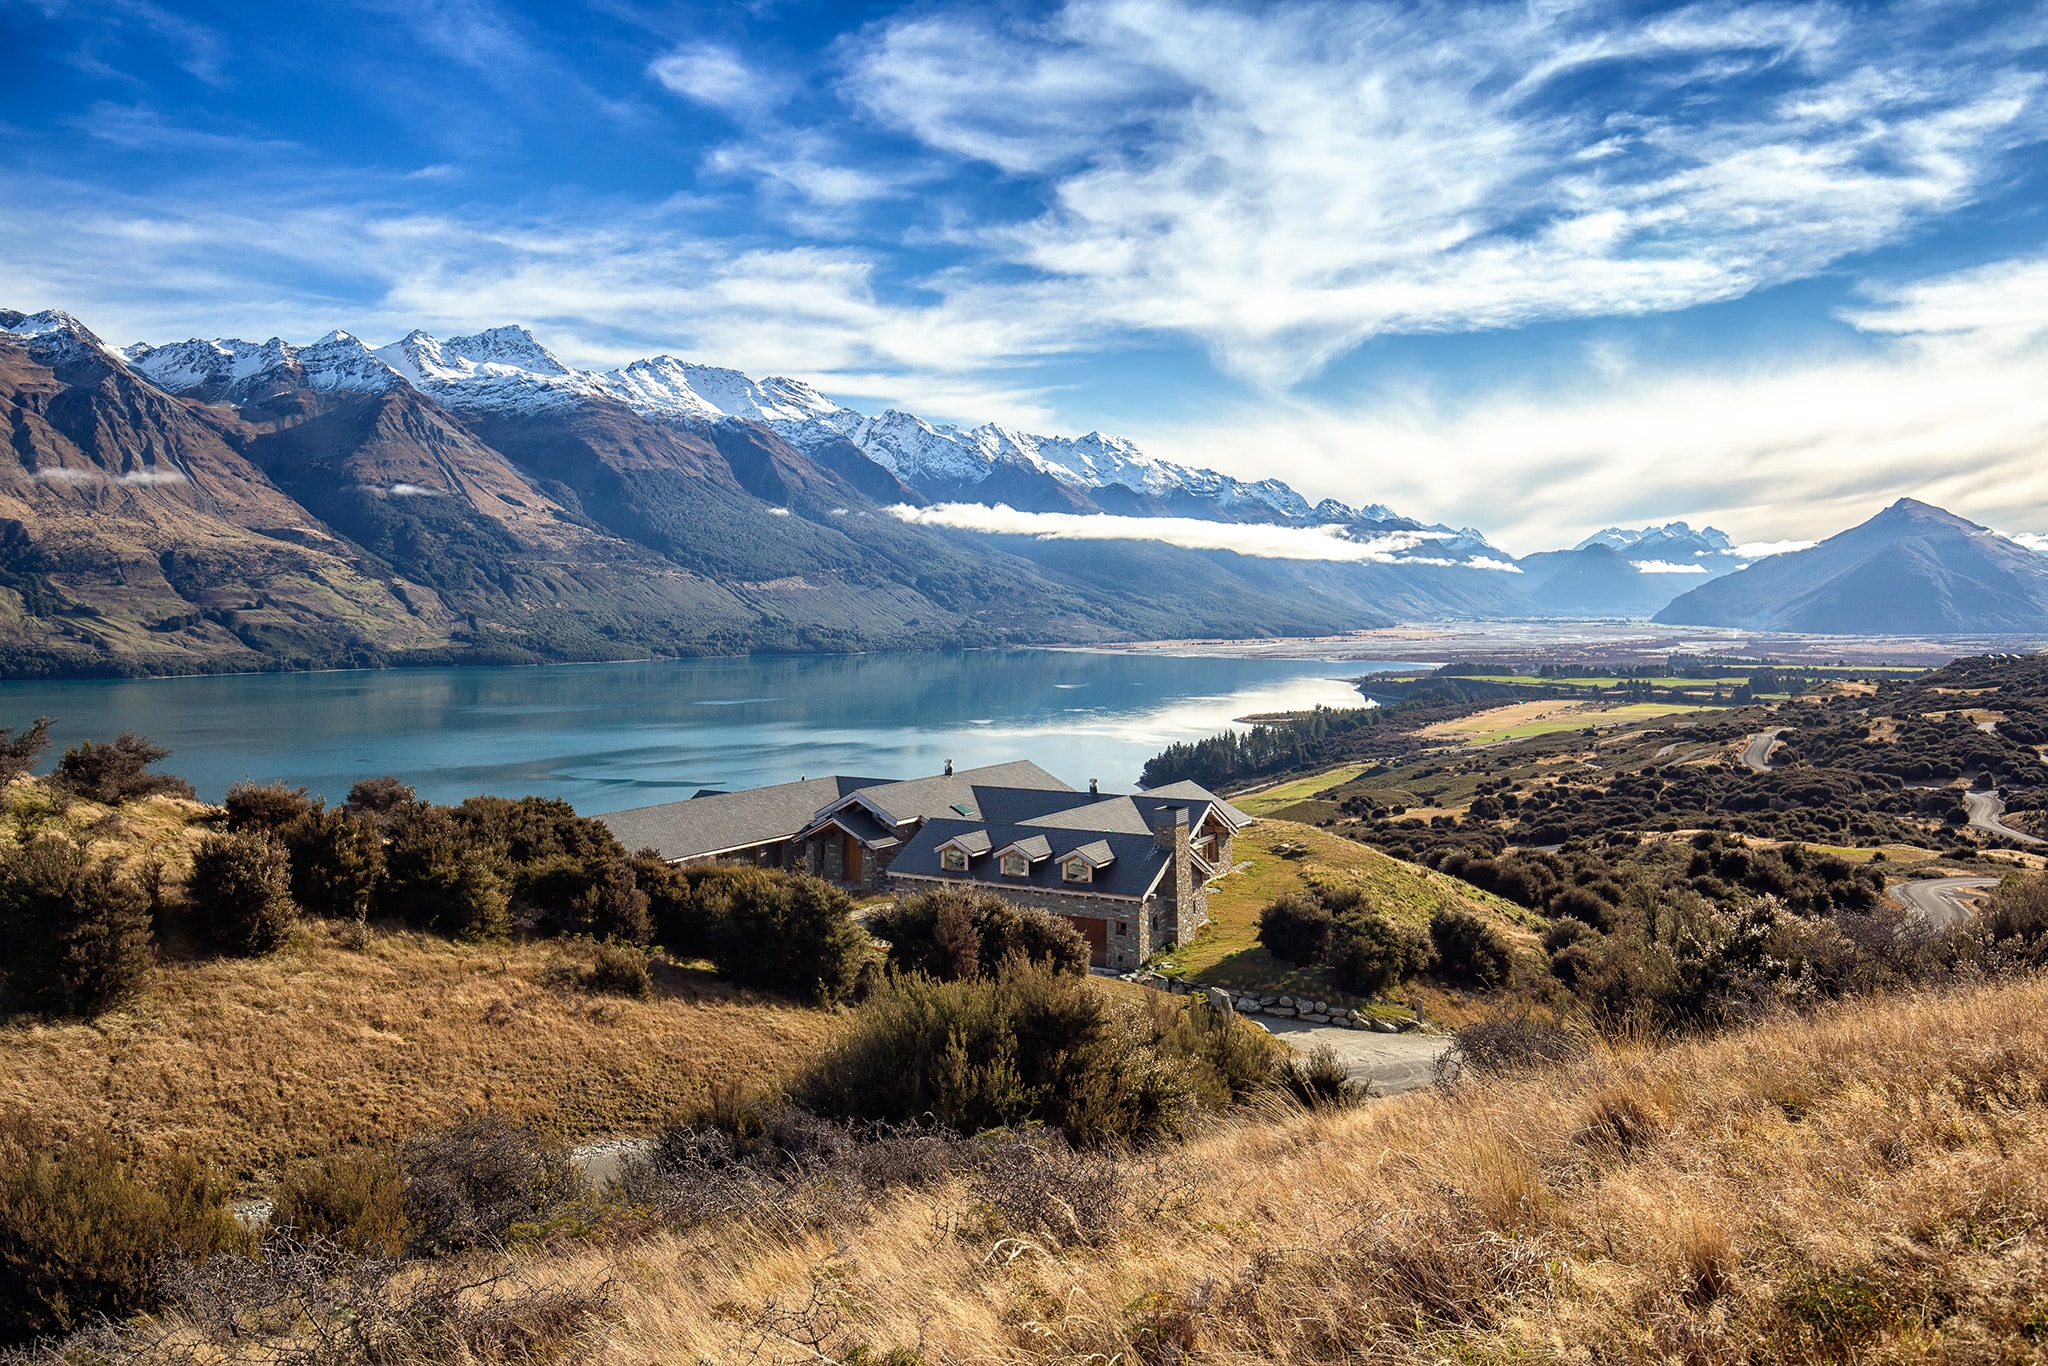 Architectural photography in Queenstown New Zealand